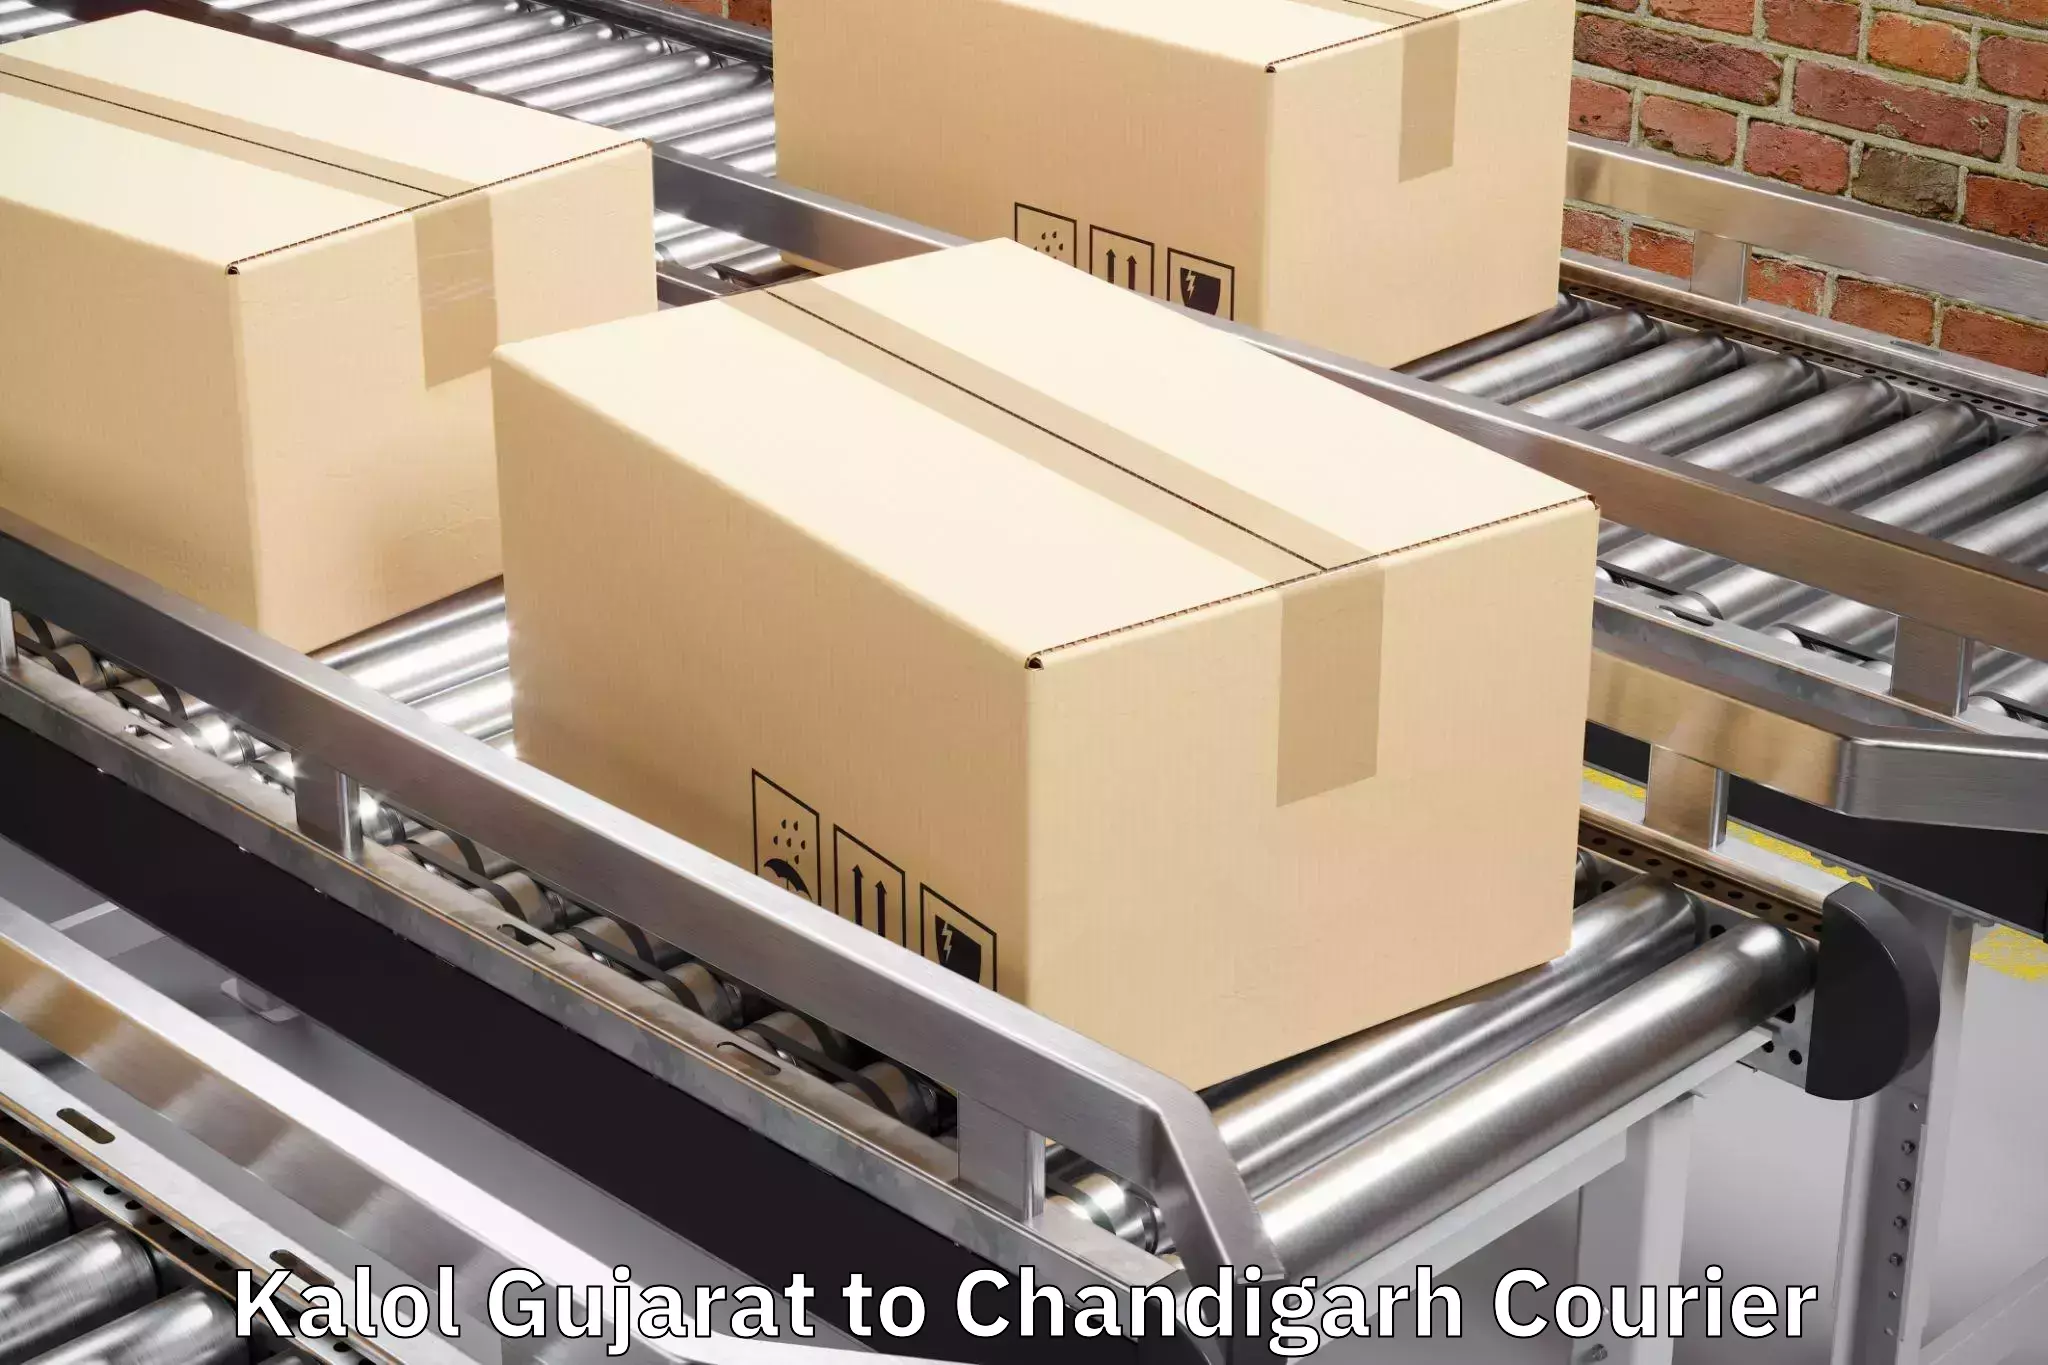 Luggage delivery operations Kalol Gujarat to Chandigarh